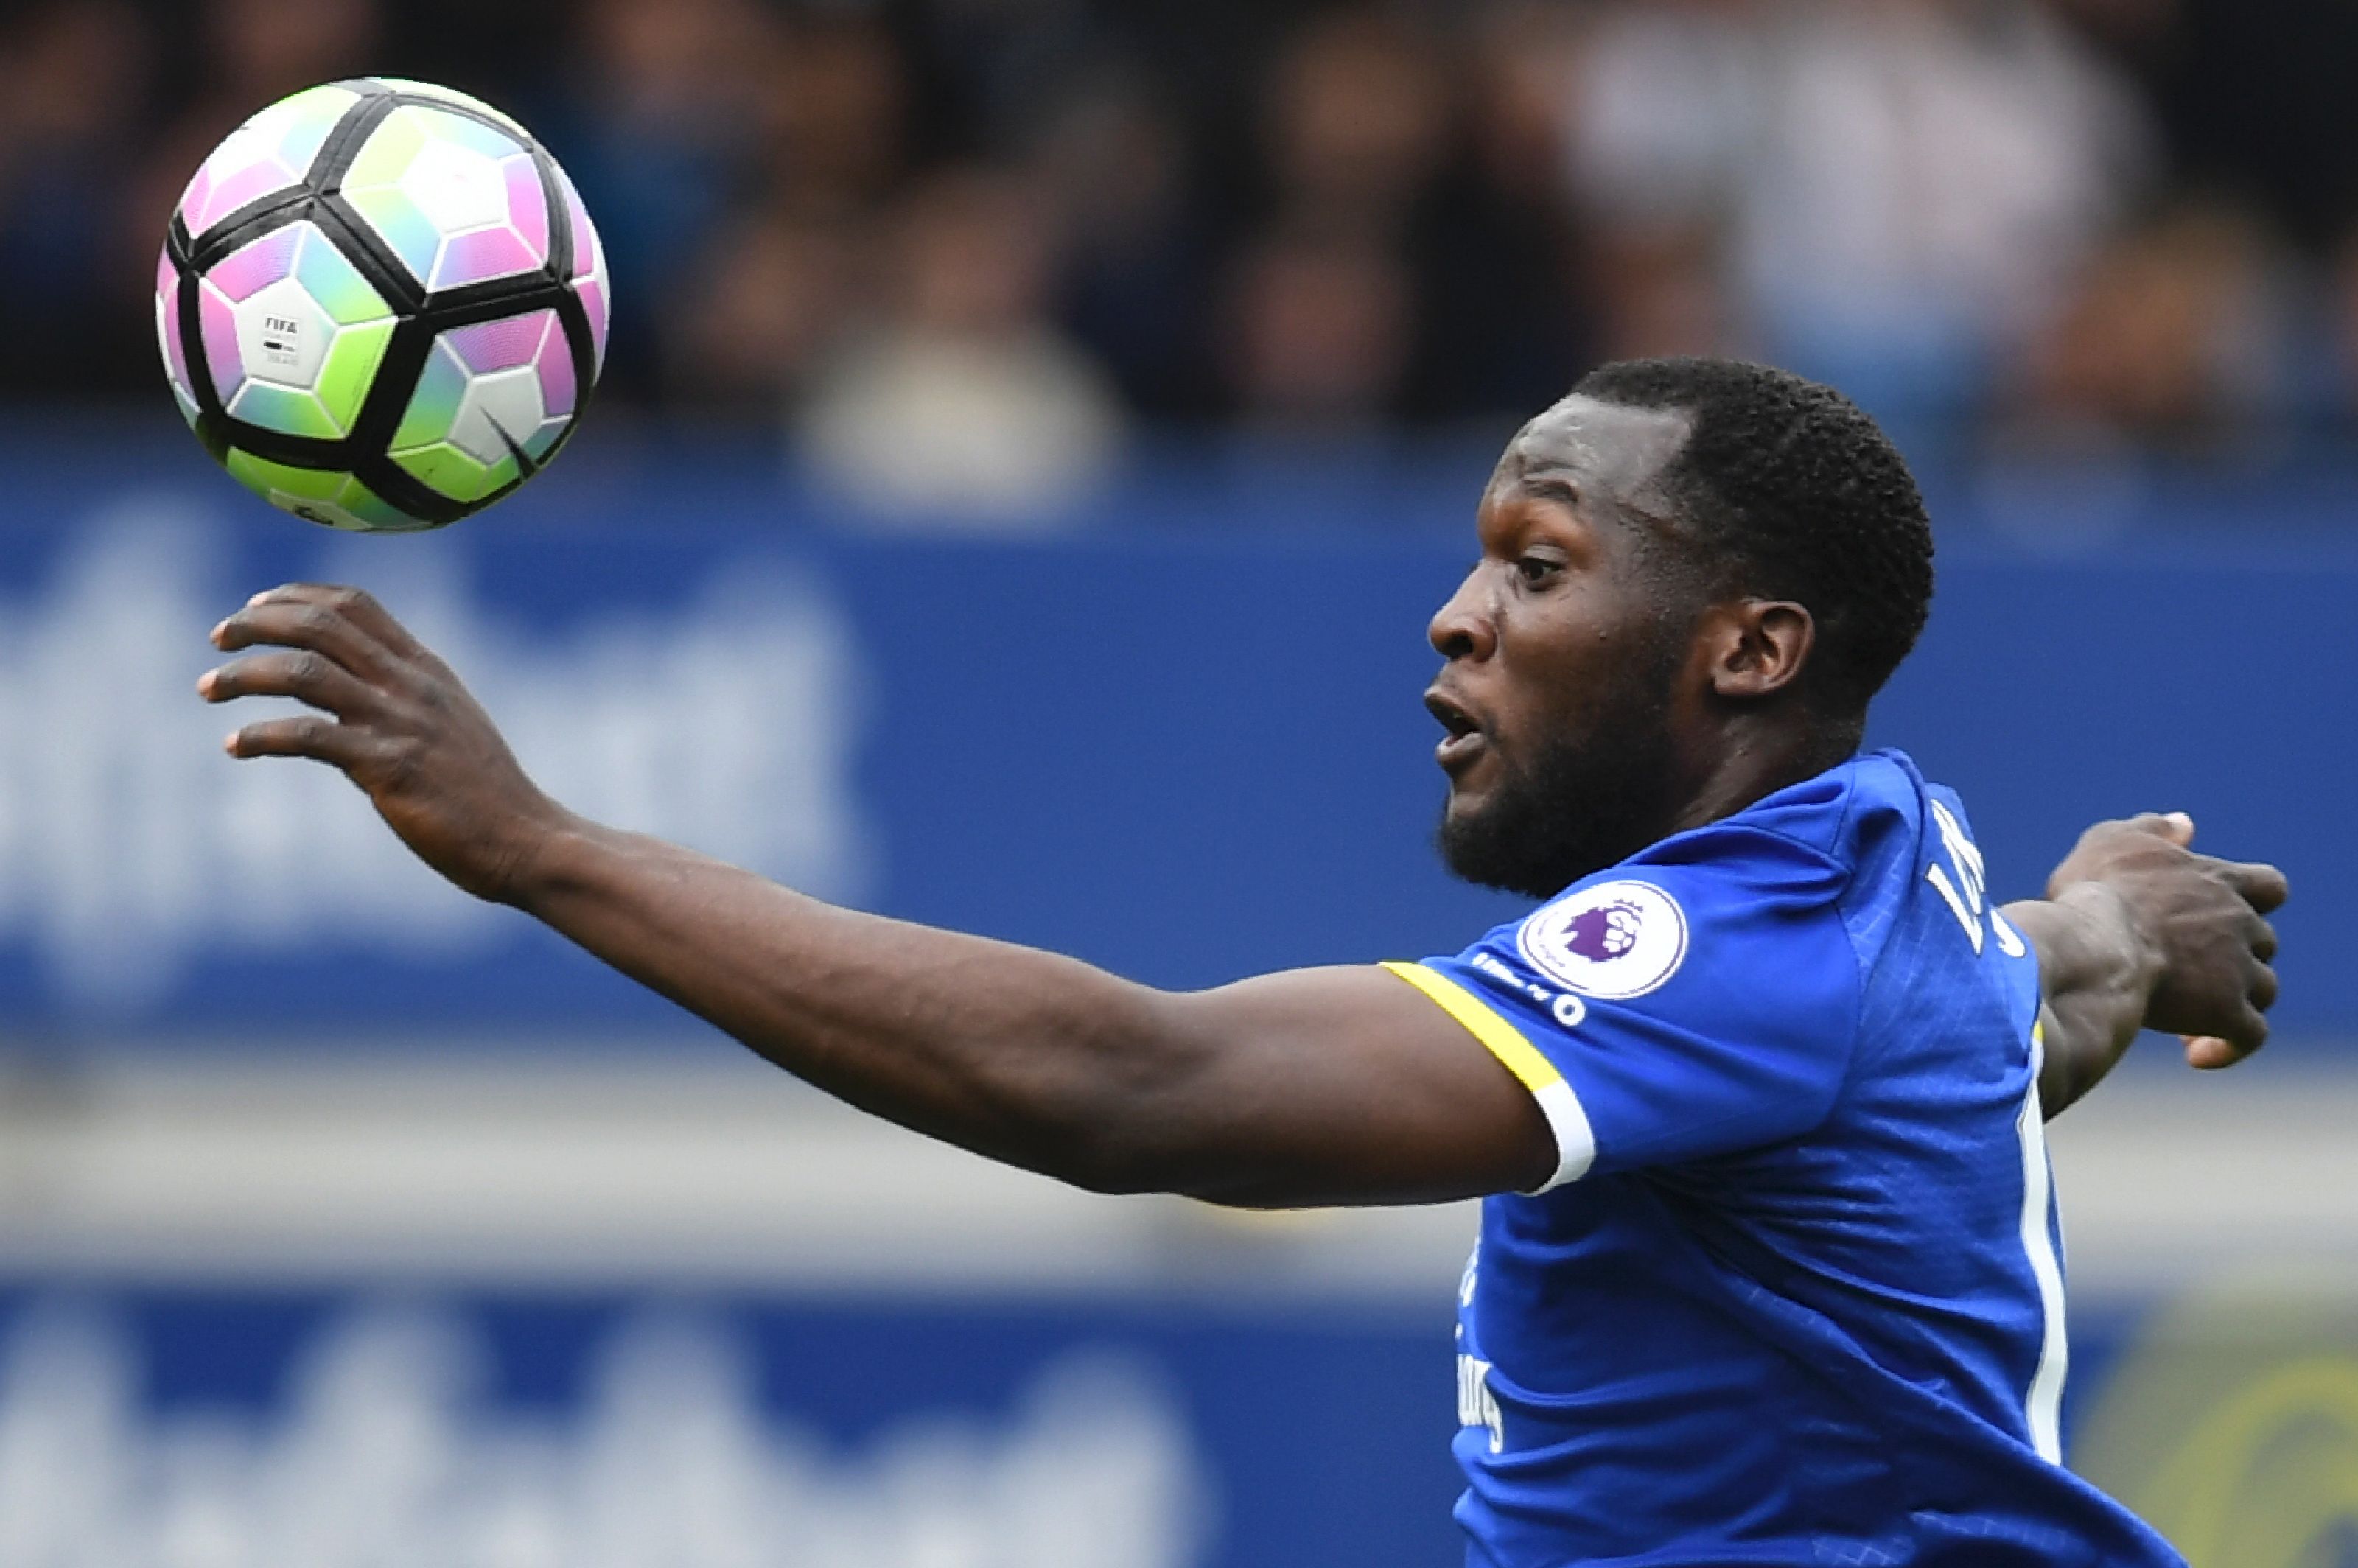 Everton's Belgian striker Romelu Lukaku controls the ball during the English Premier League football match between Everton and Chelsea at Goodison Park in Liverpool, north west England on April 30, 2017. / AFP PHOTO / Paul ELLIS / RESTRICTED TO EDITORIAL USE. No use with unauthorized audio, video, data, fixture lists, club/league logos or 'live' services. Online in-match use limited to 75 images, no video emulation. No use in betting, games or single club/league/player publications.  /         (Photo credit should read PAUL ELLIS/AFP/Getty Images)